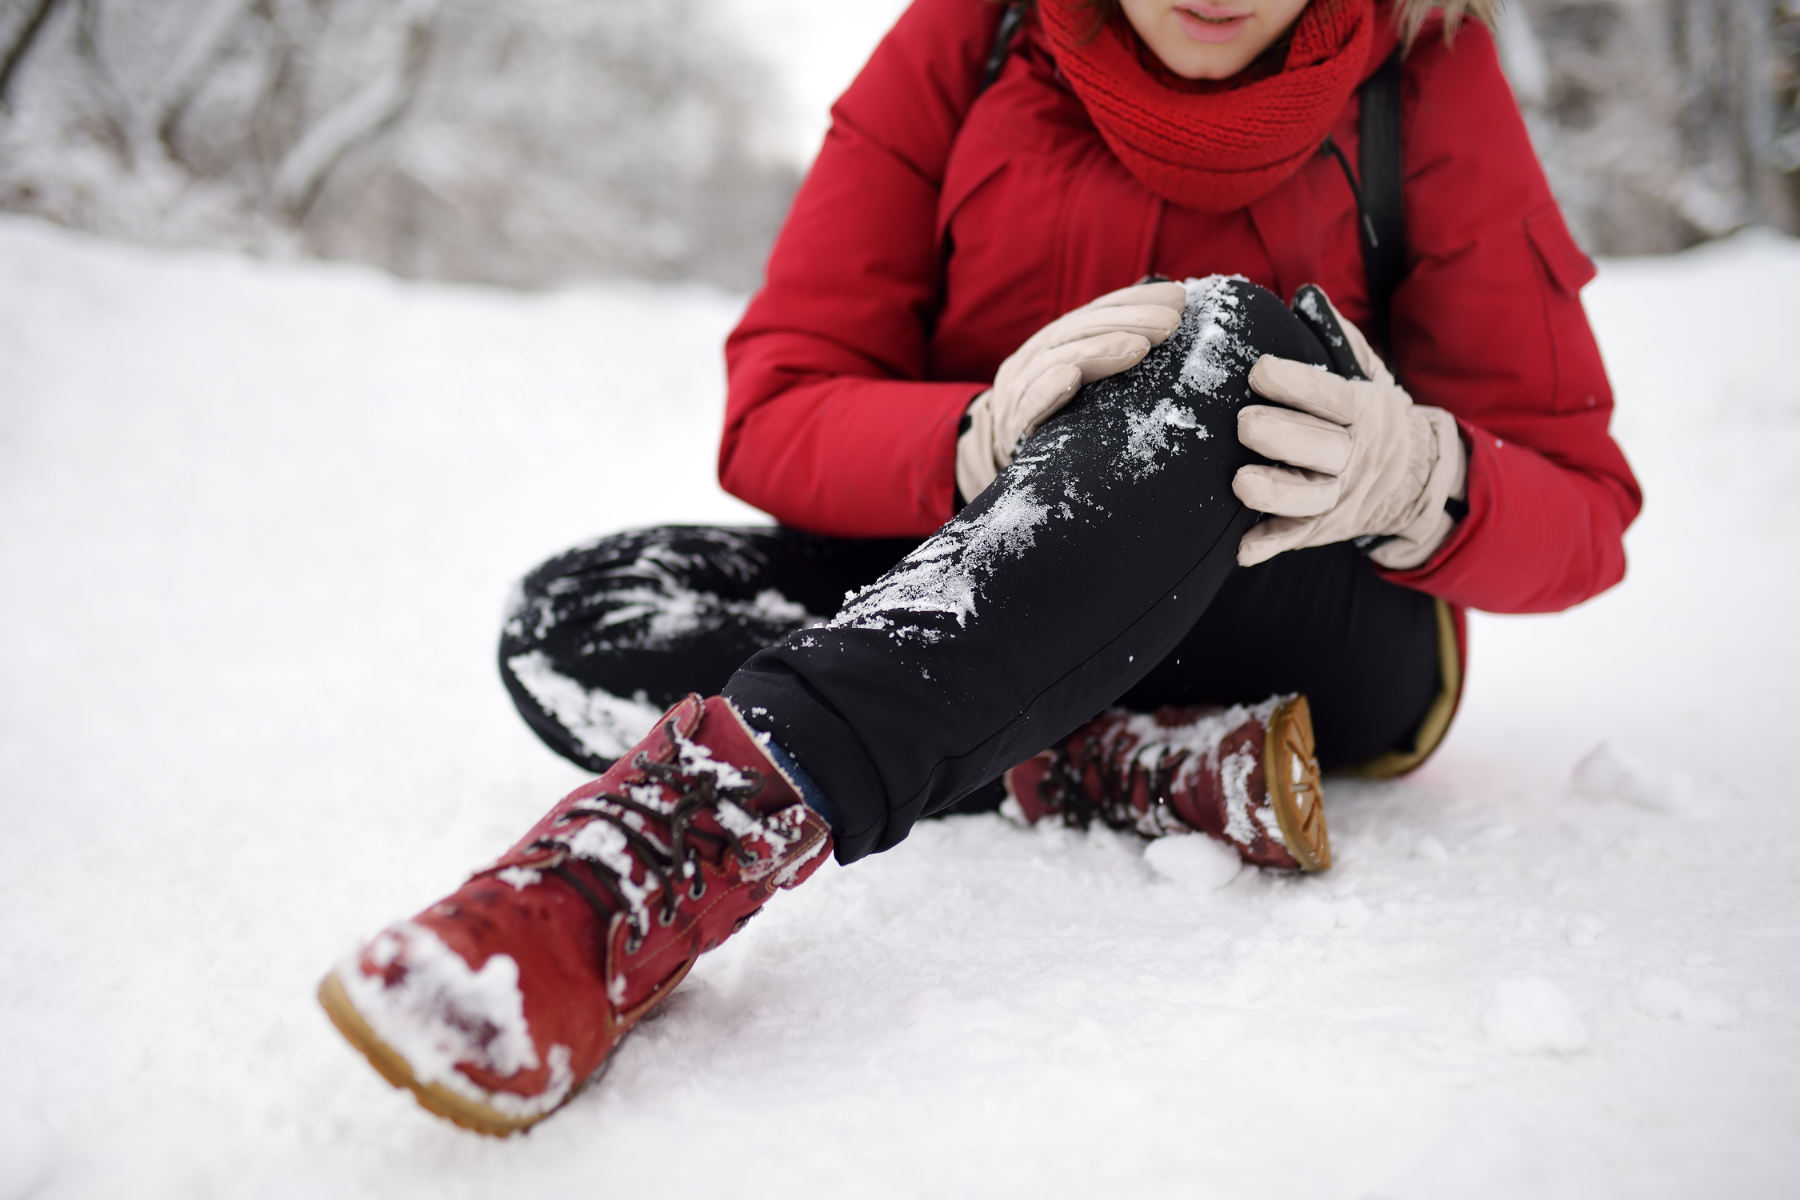 5 Tips to Avoid Common Winter Injuries